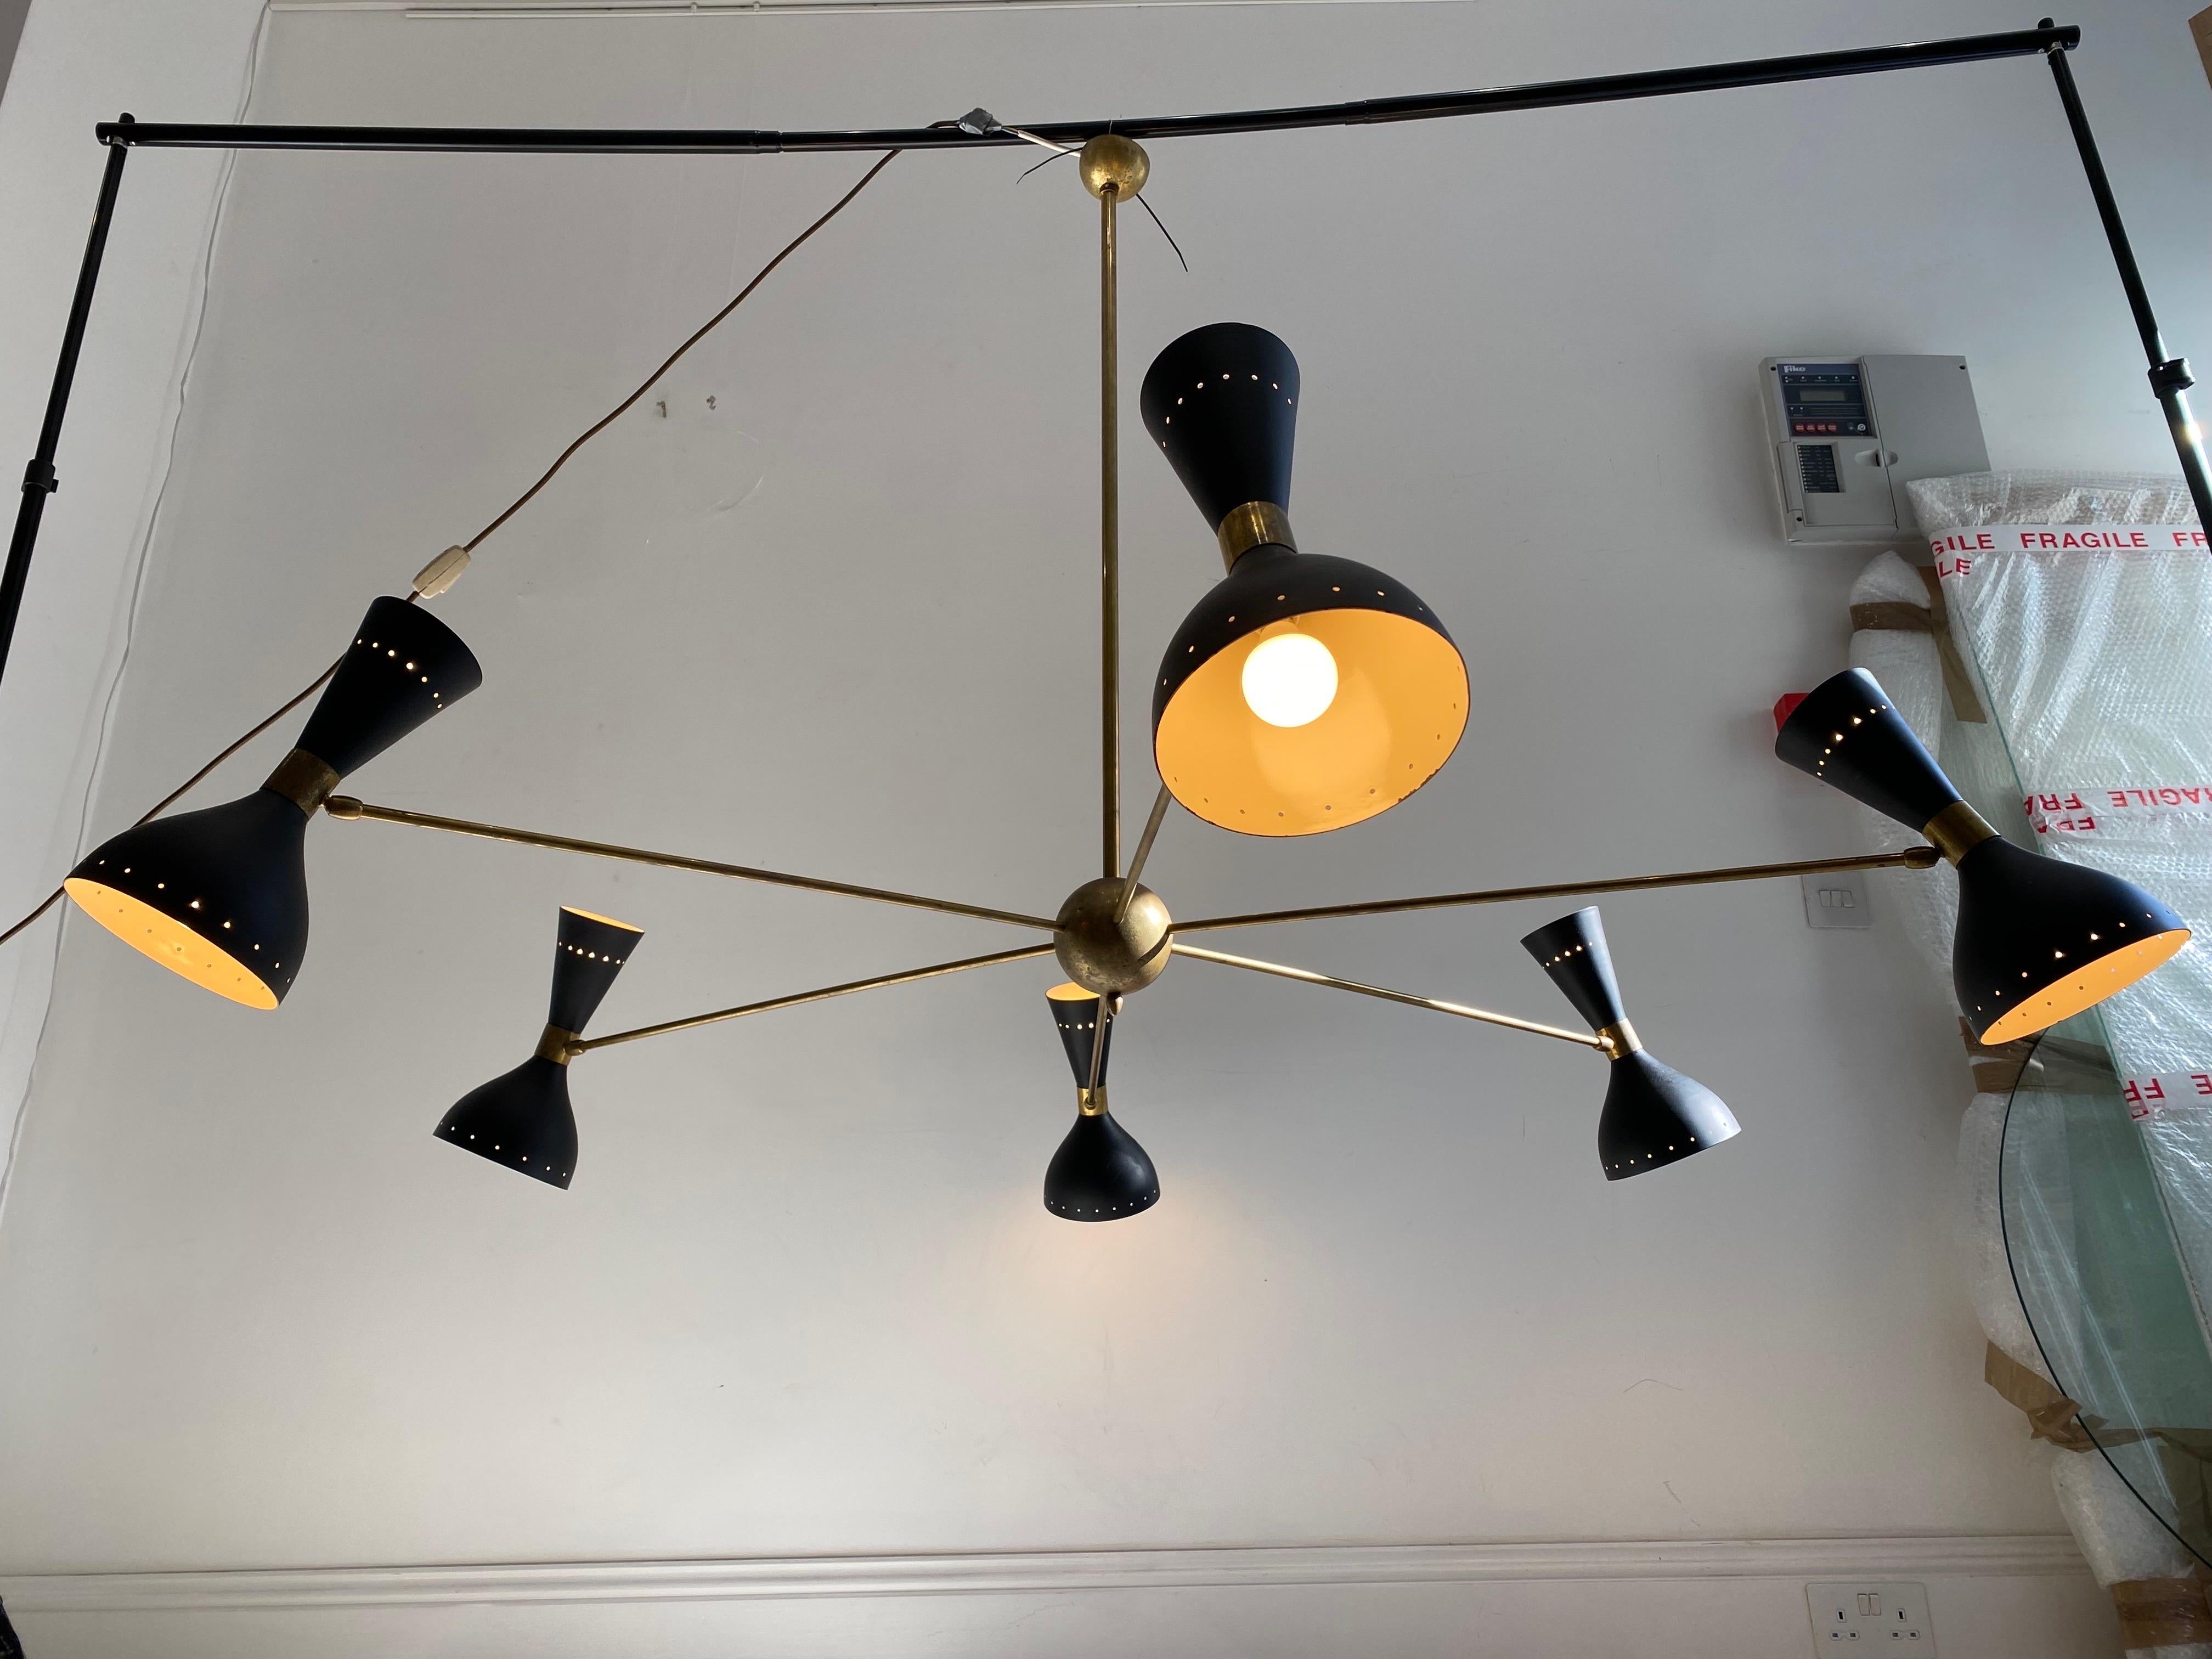 A classic ceiling lamp in the manner of Stilnovo. Please note this is not a modern copy, it's a 1970s italian lamp. Imported from a first buyer in a house in Greece where they imported it from Italy in the 1970s. Six arms, each arm takes two light